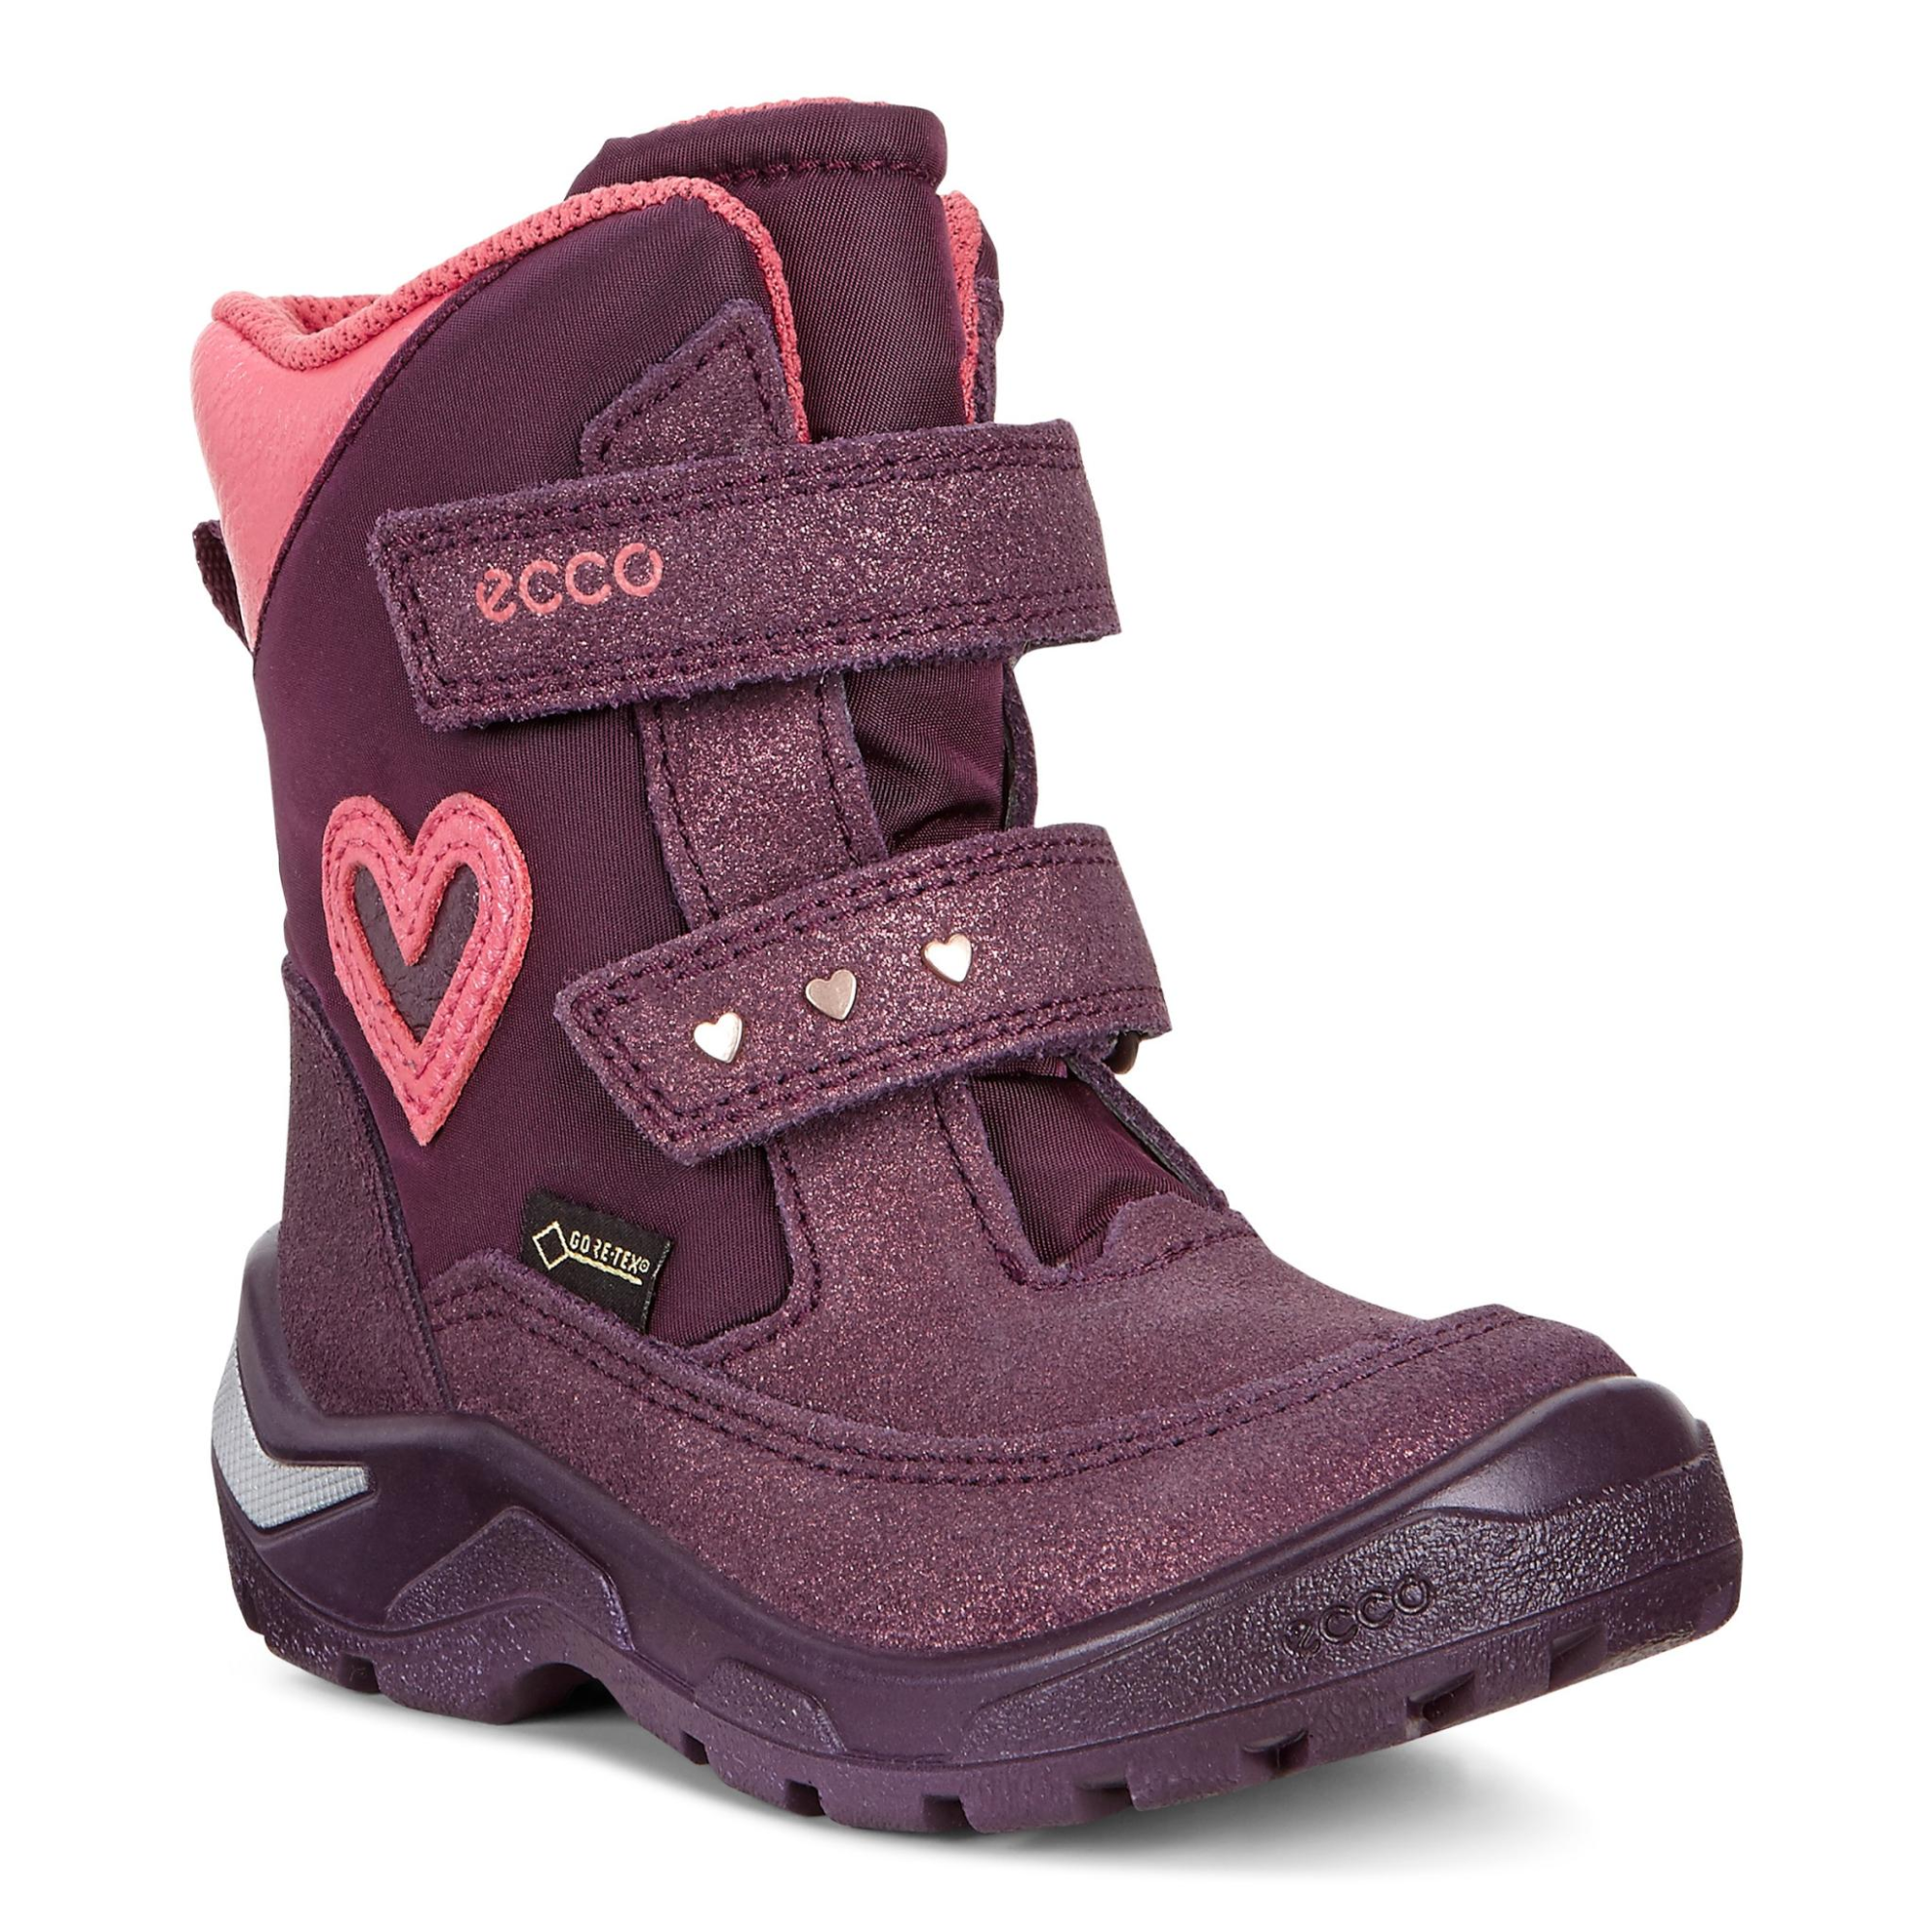 Ecco Boot 23 - Products - Veryk Mall - Veryk Mall, many product, quick response, safe your money!